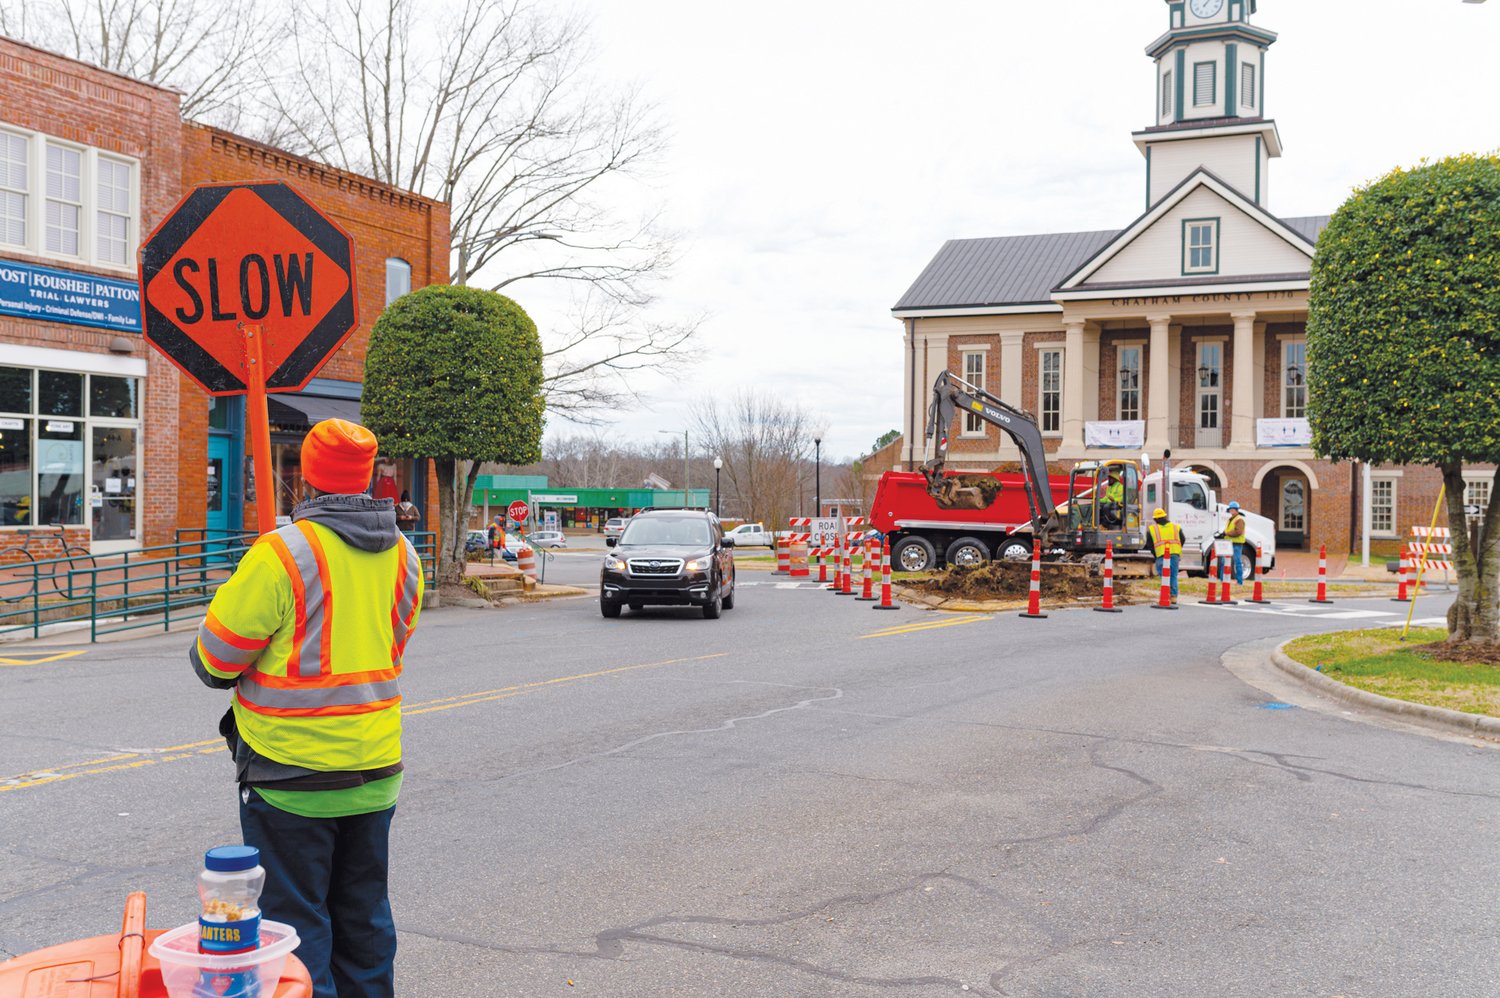 Work on the $2.48 million overhaul of Pittsboro's iconic traffic circle began Monday. Until the planned completion scheduled for October, drivers will face detours in the vicinity.